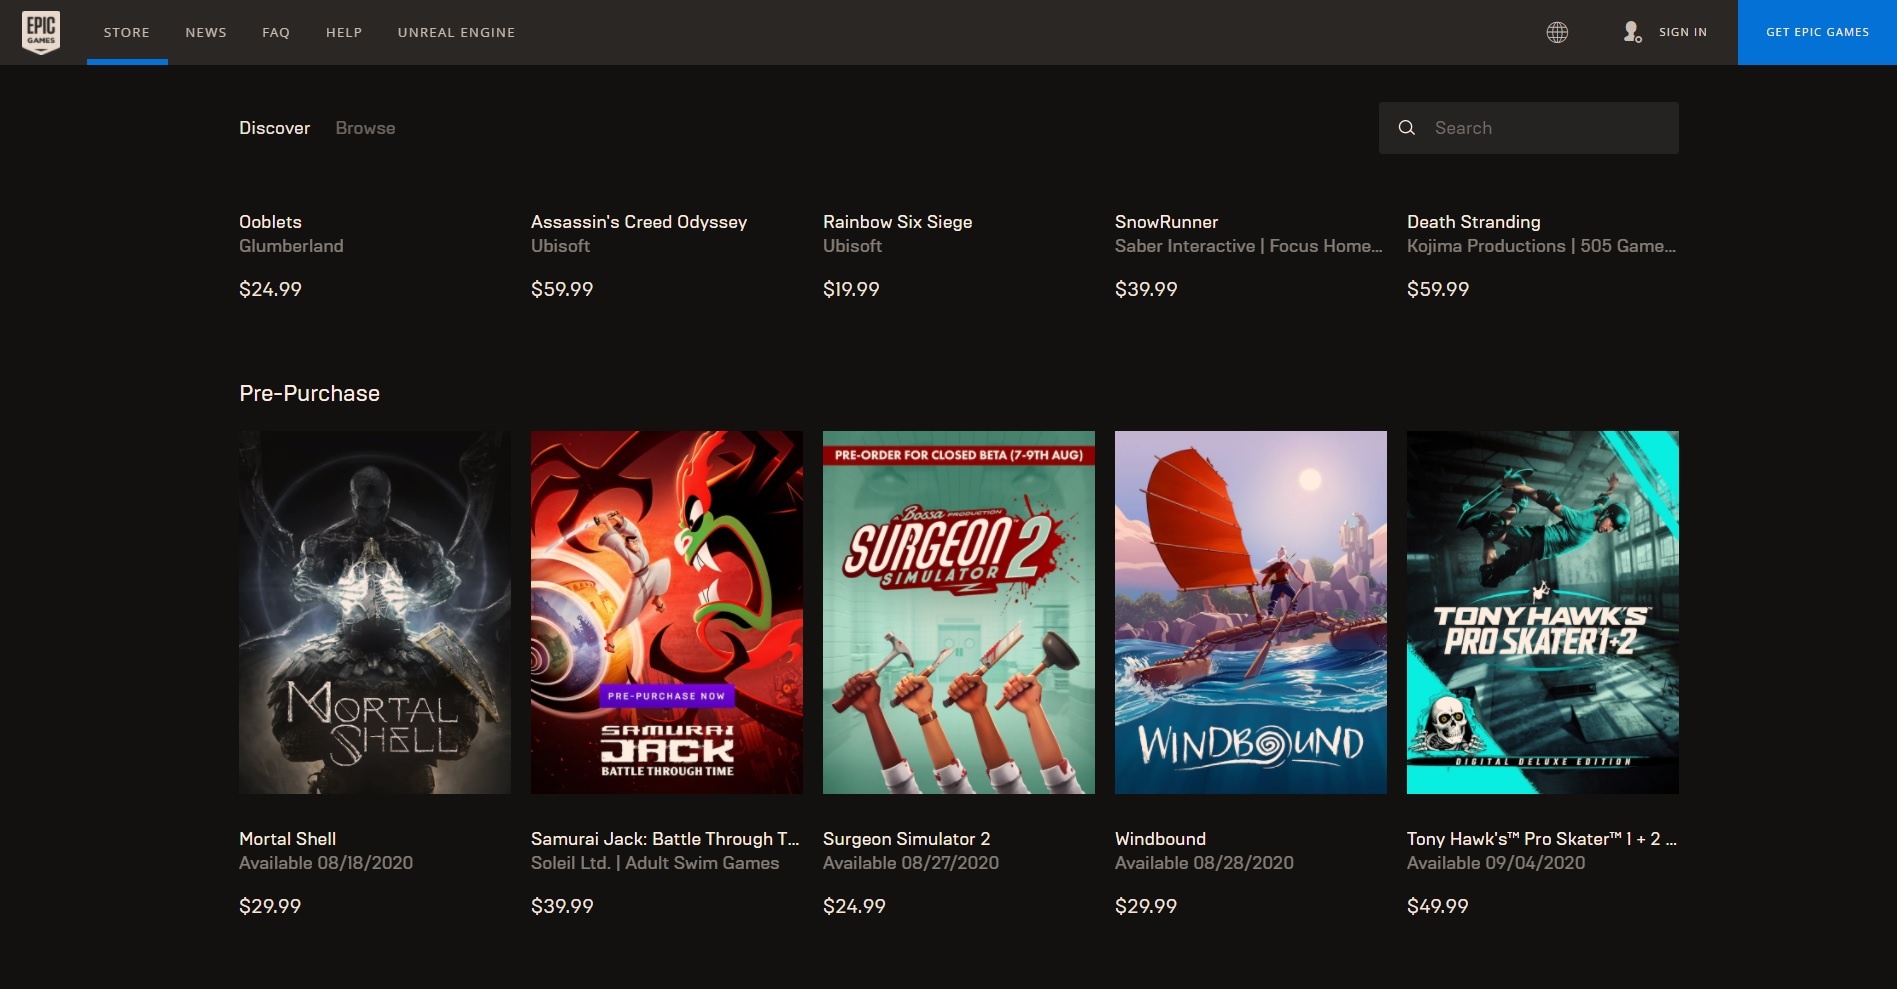 Epic Games Store Takes On Steam By Opening Its Store To All Developers